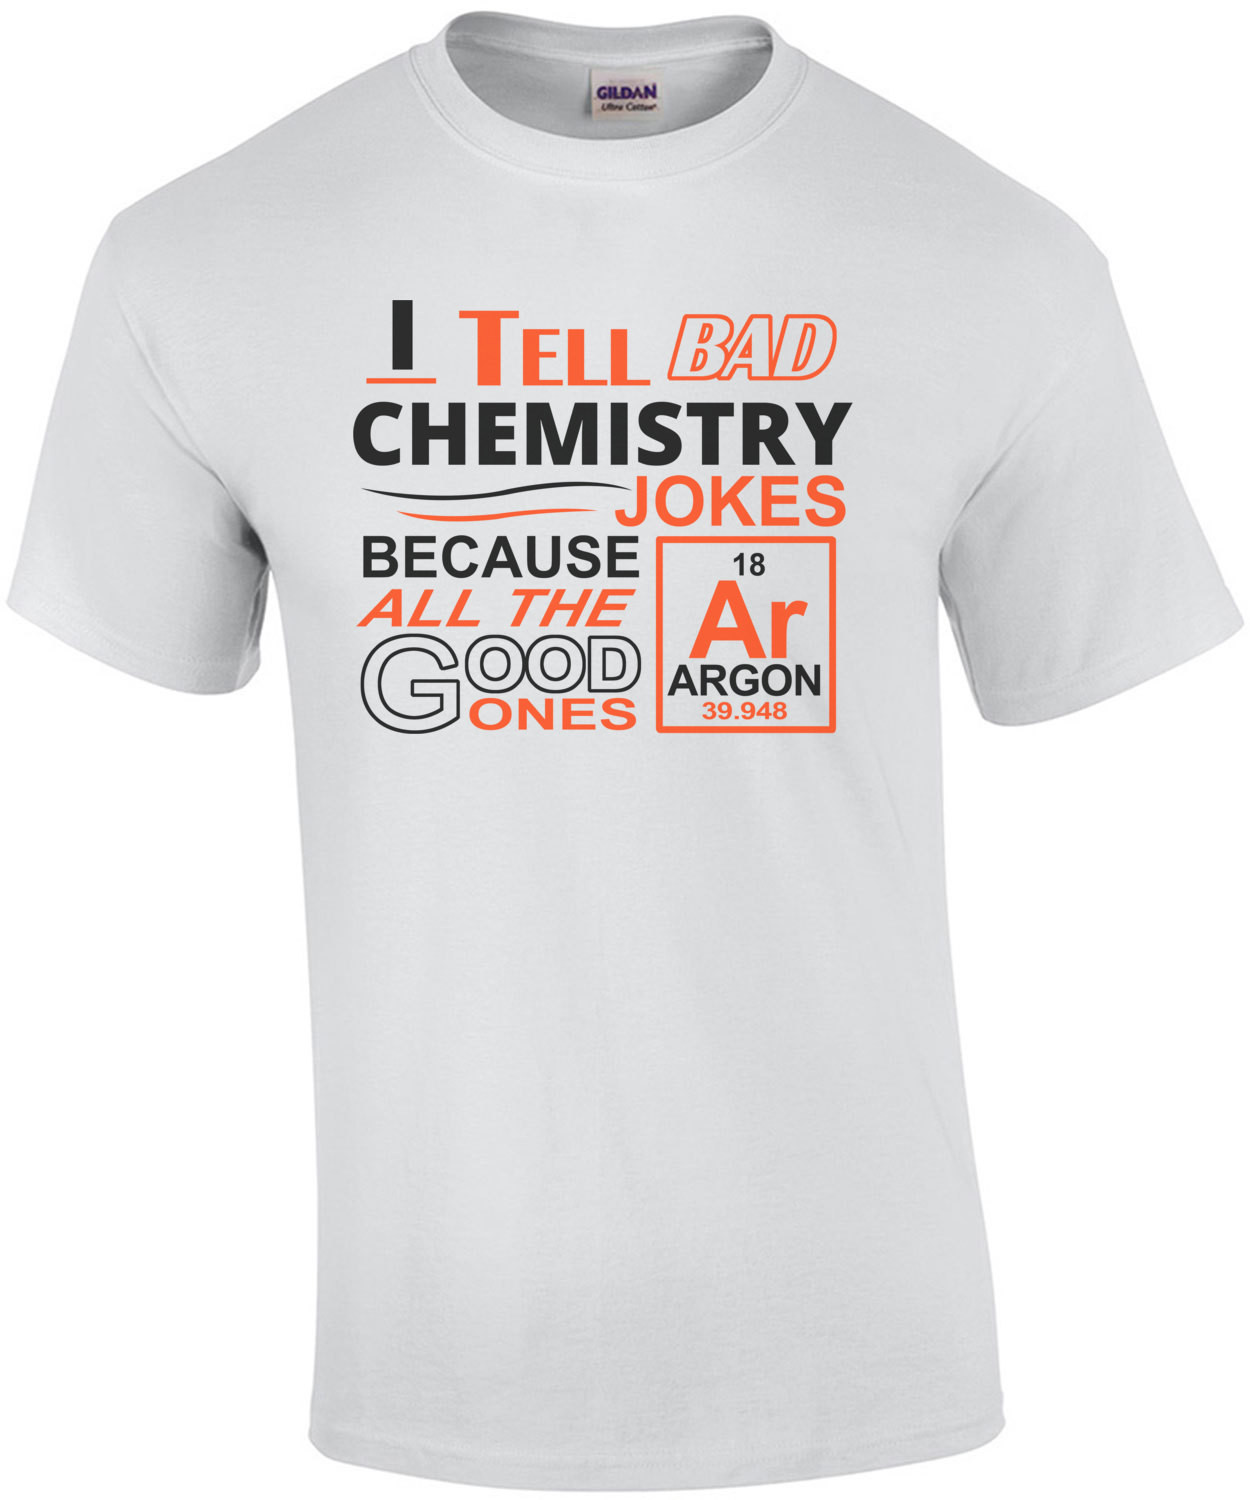 I Tell Bad Chemistry Jokes Because All The Good Ones Argon T-Shirt